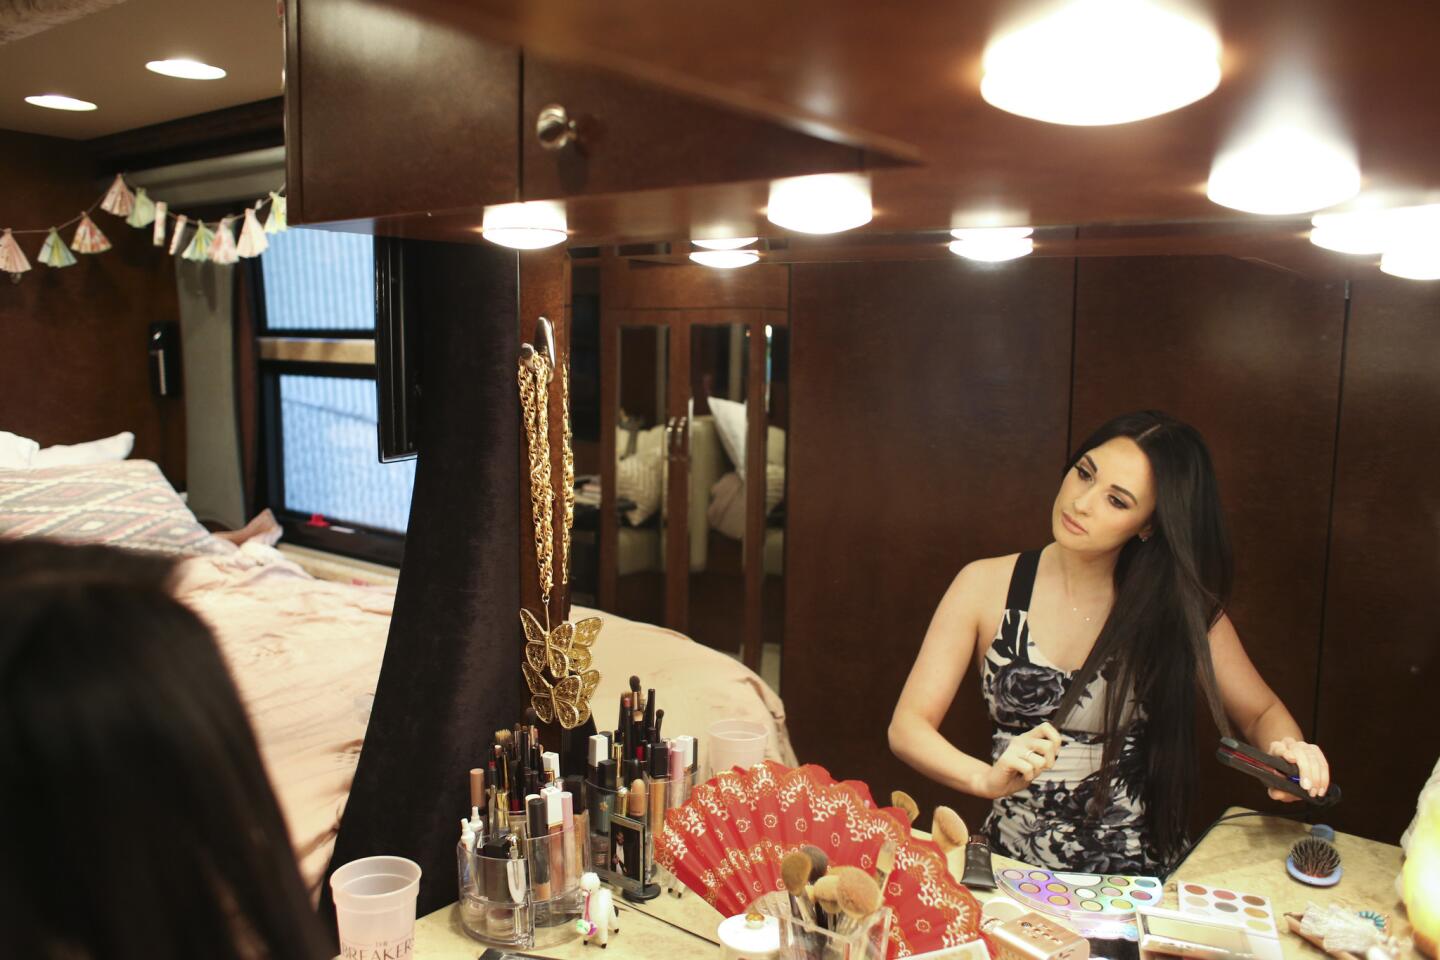 Kacey Musgraves prepares for her show at the U.S. Cellular Center in her tour bus.